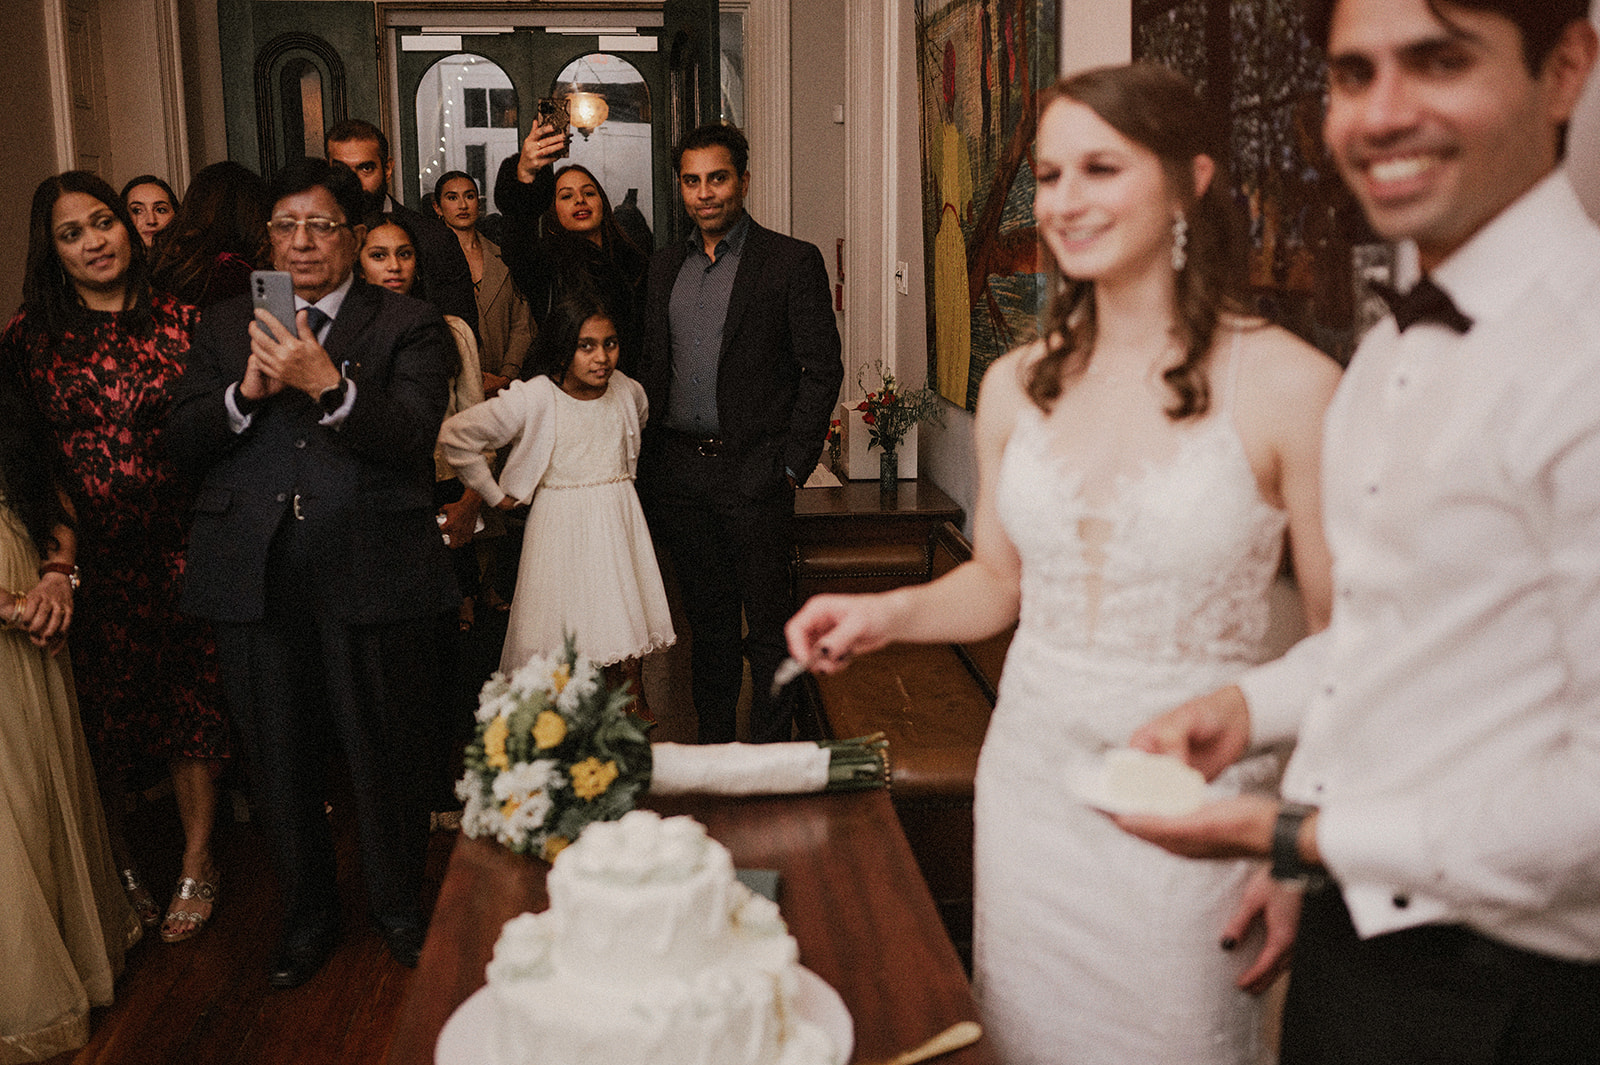 bride and groom cutting wedding cake with family and friends looking and clapping